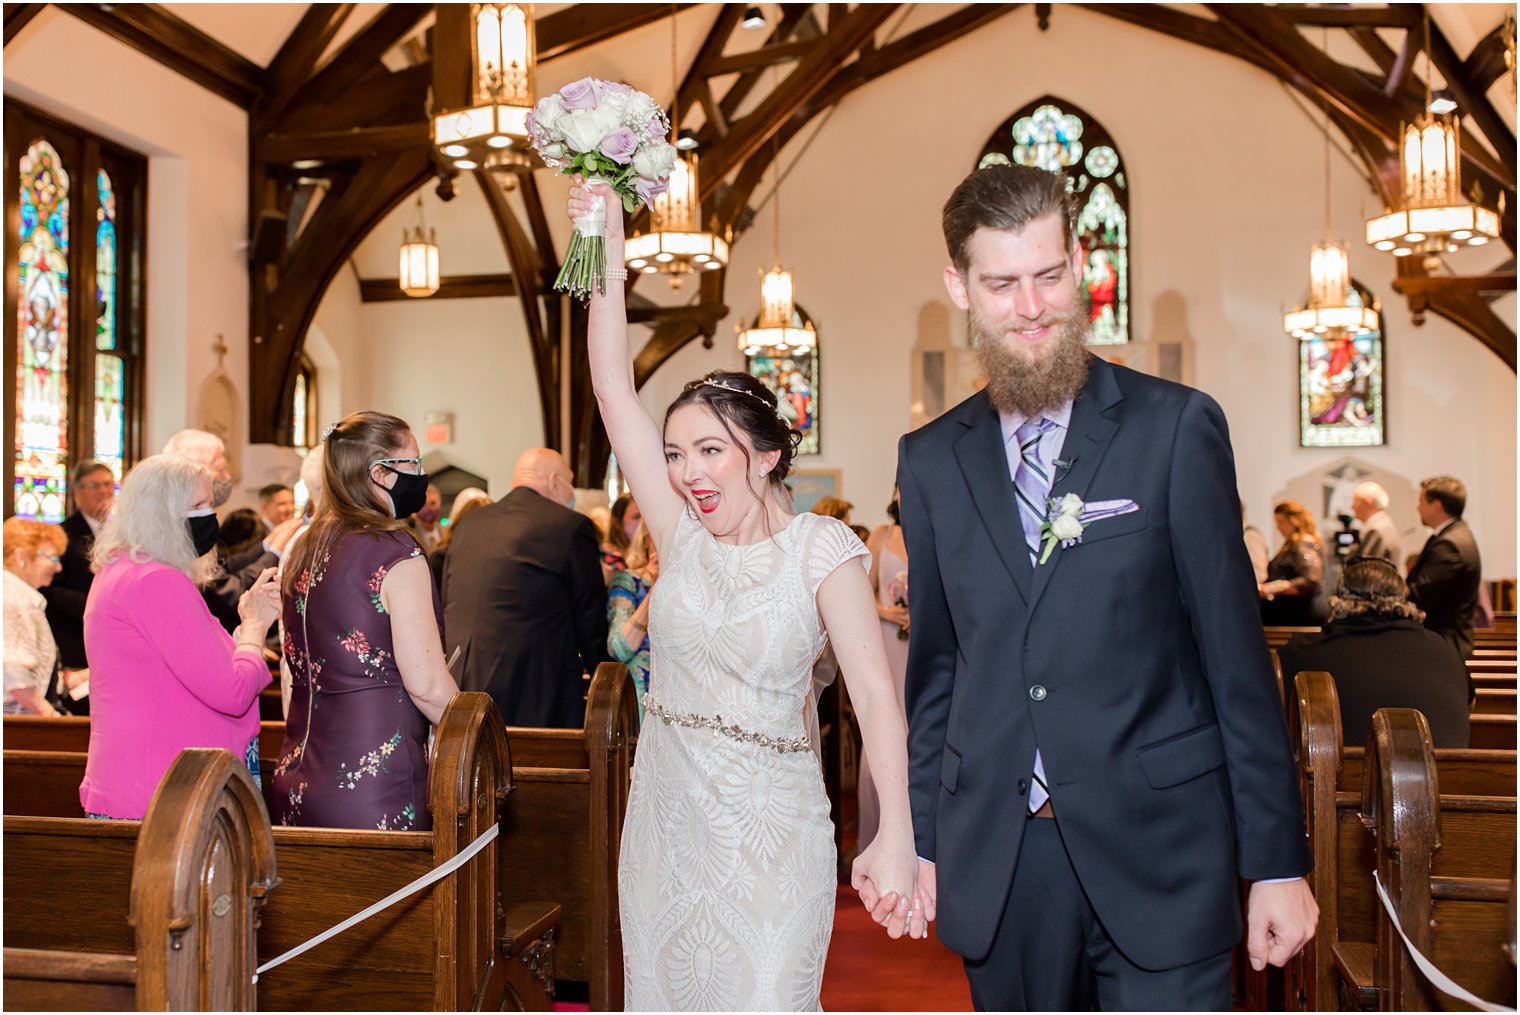 newlyweds cheer walking down aisle during traditional church wedding in New Jersey